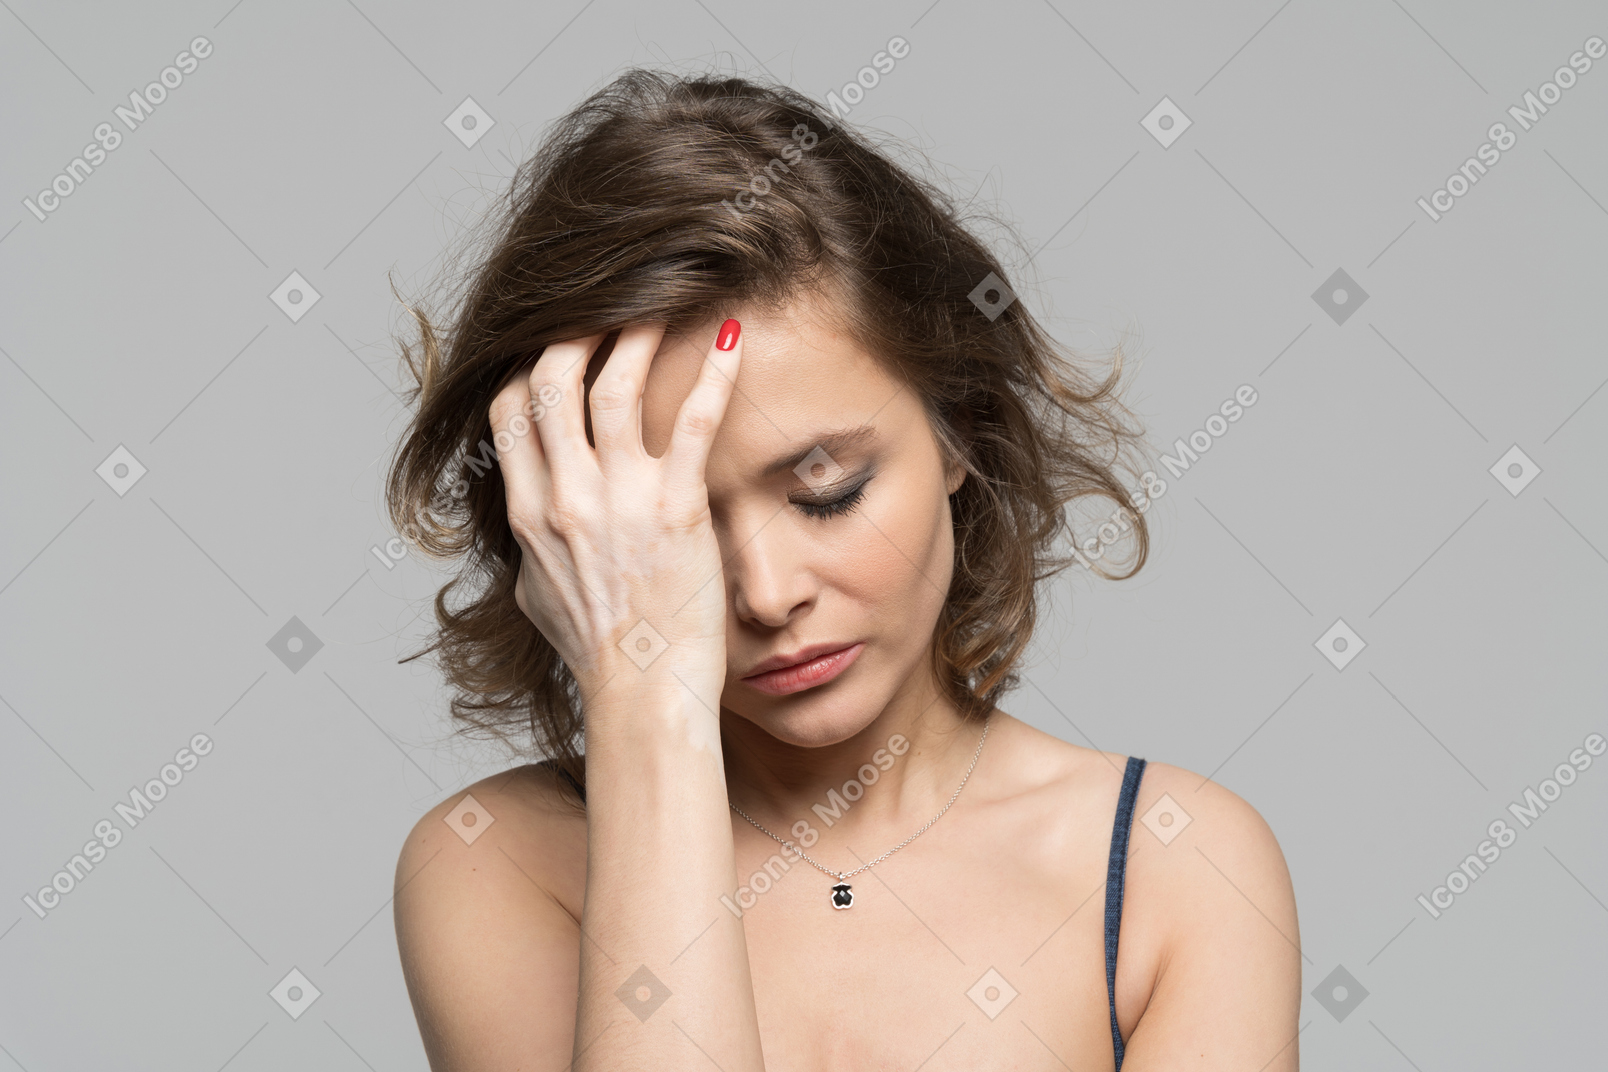 Depressed woman leaning on her hand